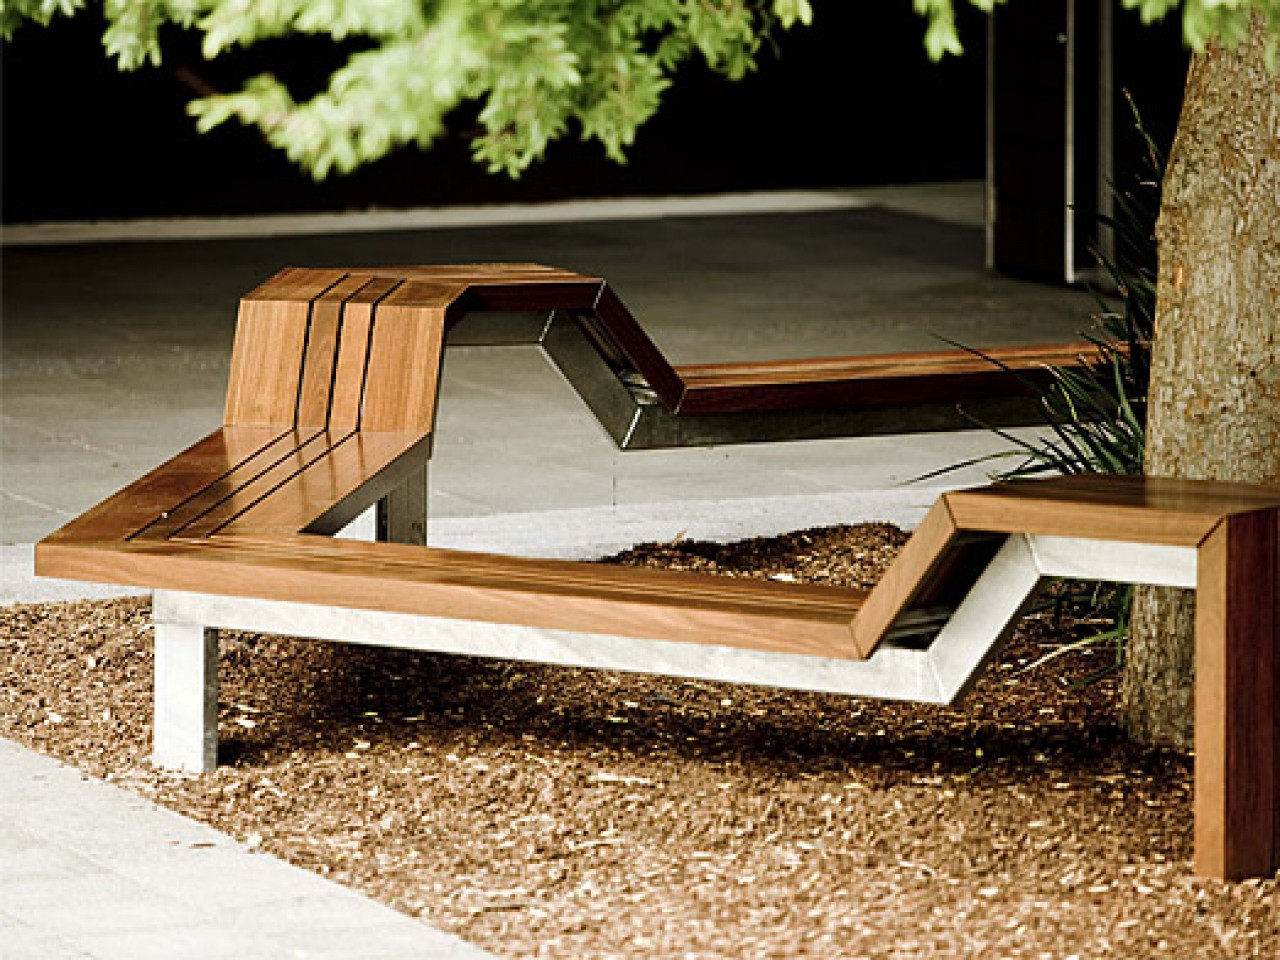 Outdoor Landscape Seating
 Benches for outdoors outdoor garden seating landscape